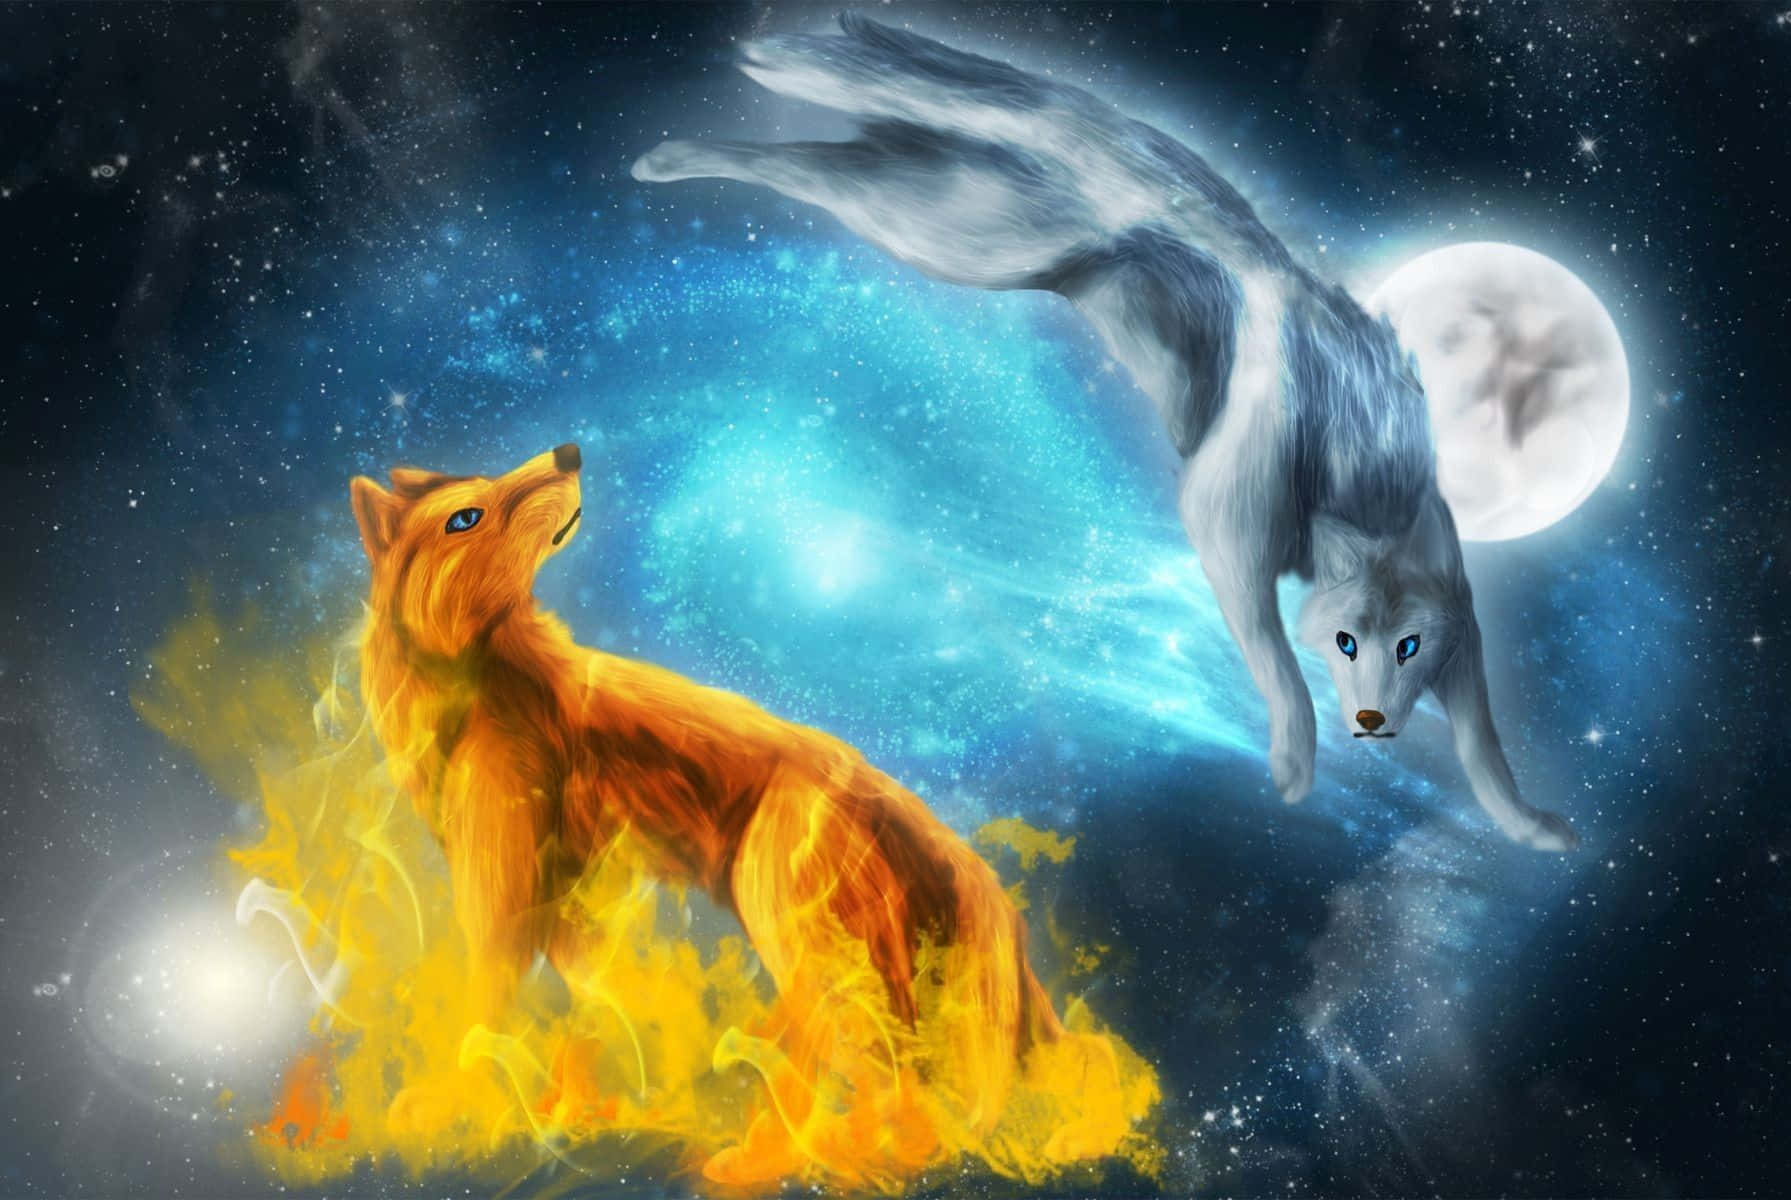 Look closely and you will see the beauty of the galaxy wolves Wallpaper